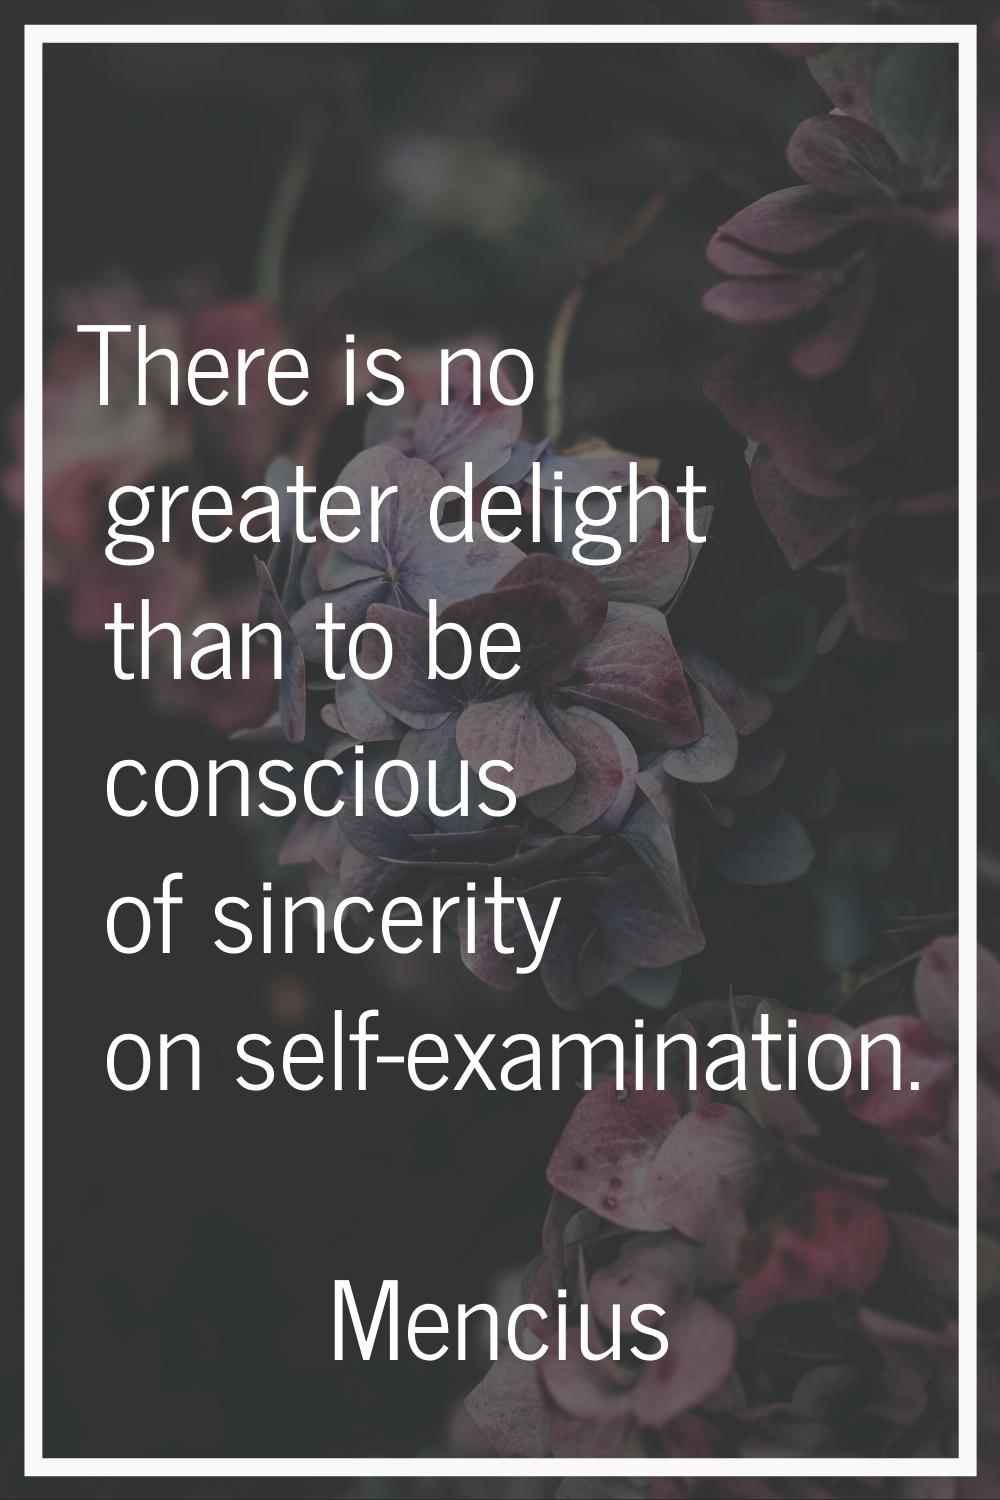 There is no greater delight than to be conscious of sincerity on self-examination.